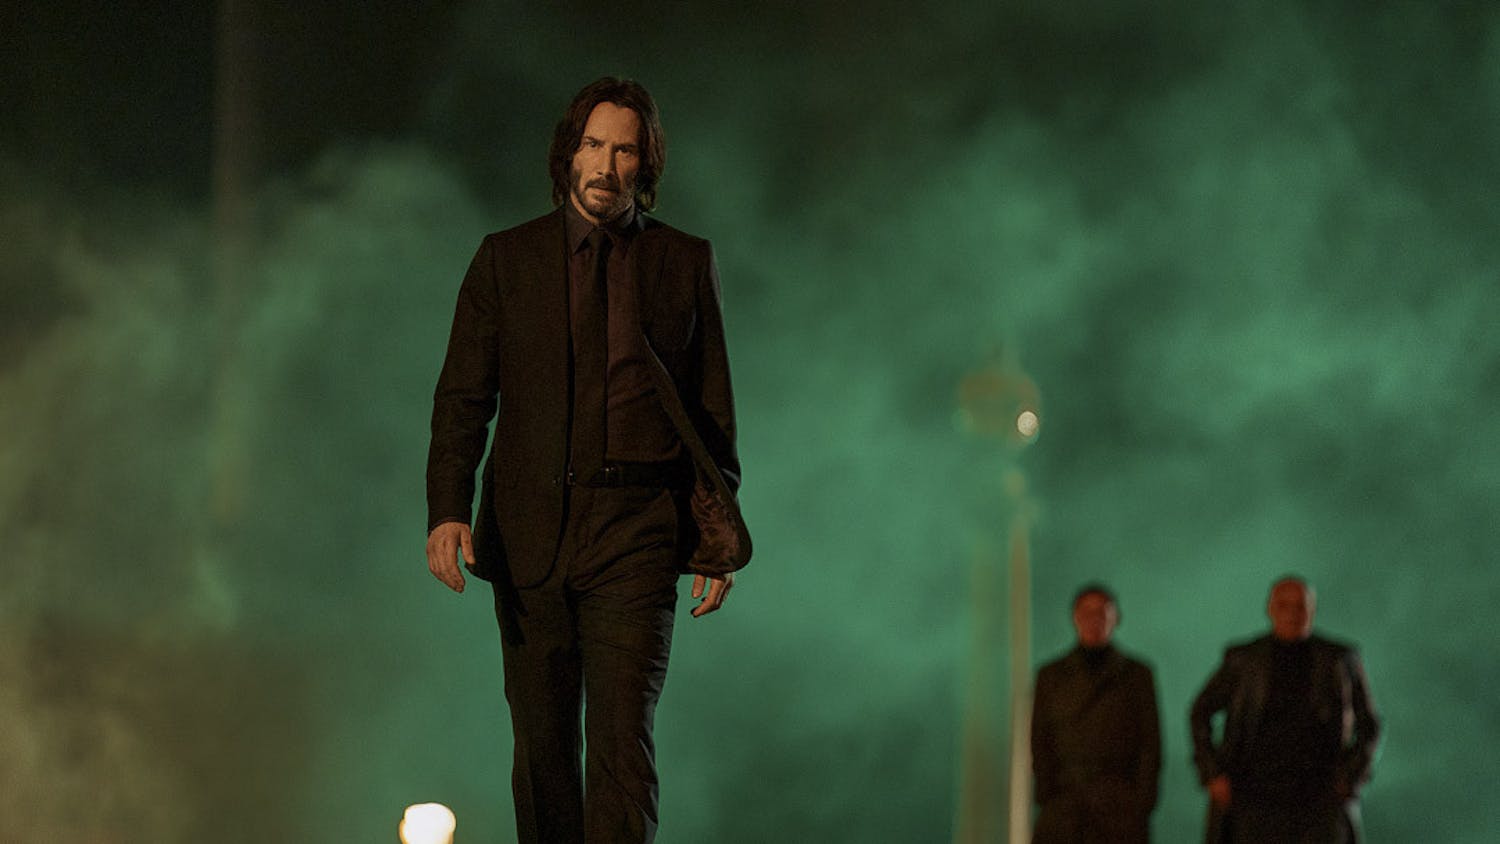 Keanu Reeves as John Wick in "John Wick: Chapter 4." The newest installment of the franchise brought in $73.5 million during its opening weekend, making it the top-grossing film of the series. Film director Chad Stahelski describes the film as a true action epic, paying homage to classic films such as the "Lawrence of Arabia" and "The Good, the Bad and the Ugly."